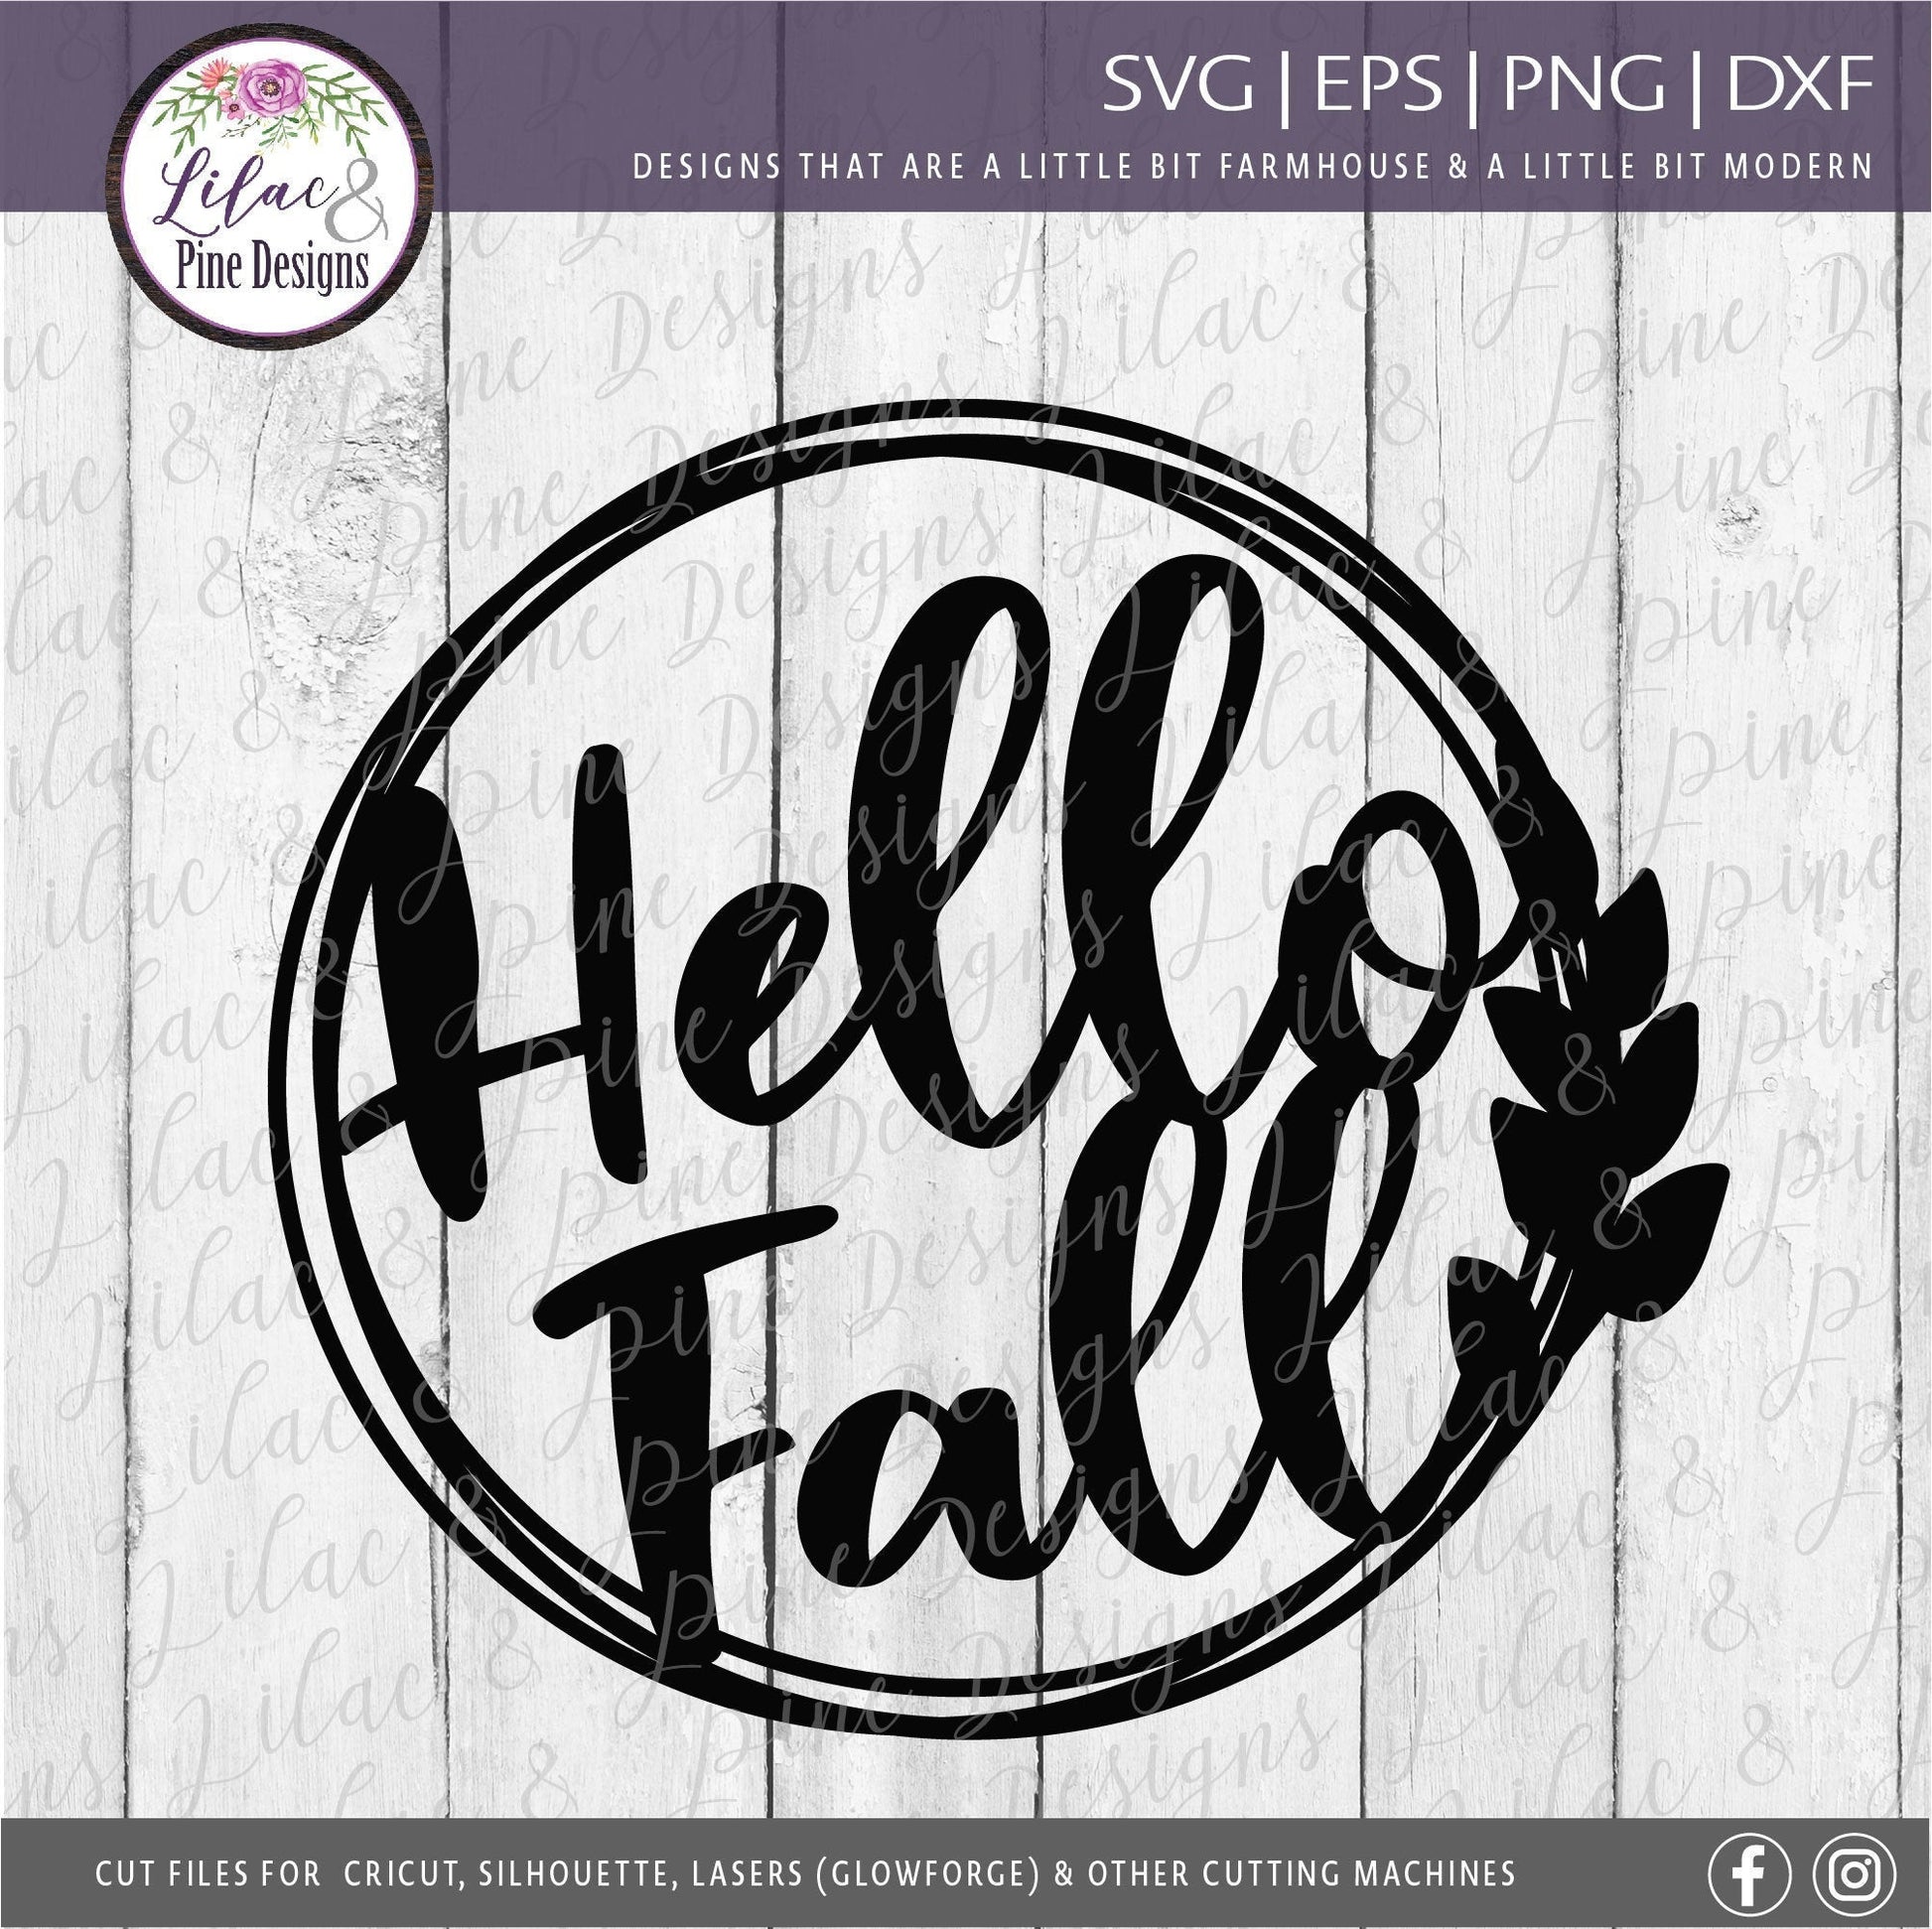 Fall SVG, Hello fall SVG, Circle of Leaves SVG, Hello fall circle Svg, Modern Farmhouse, Fall decor, tiered tray sign file, Svg cut file